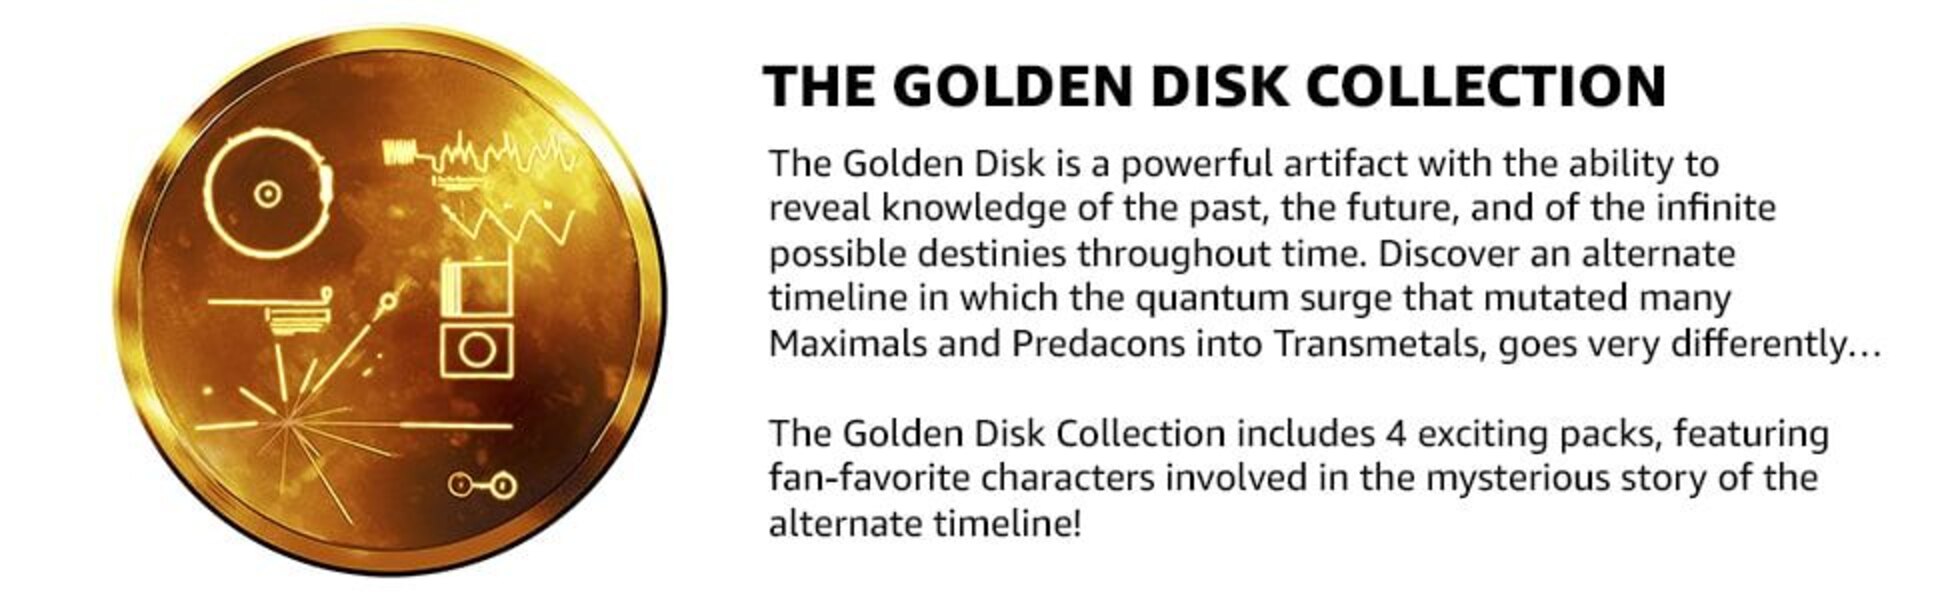 Transformers Golden Disk Collection Amazon Exclusives Official Details  (2 of 5)